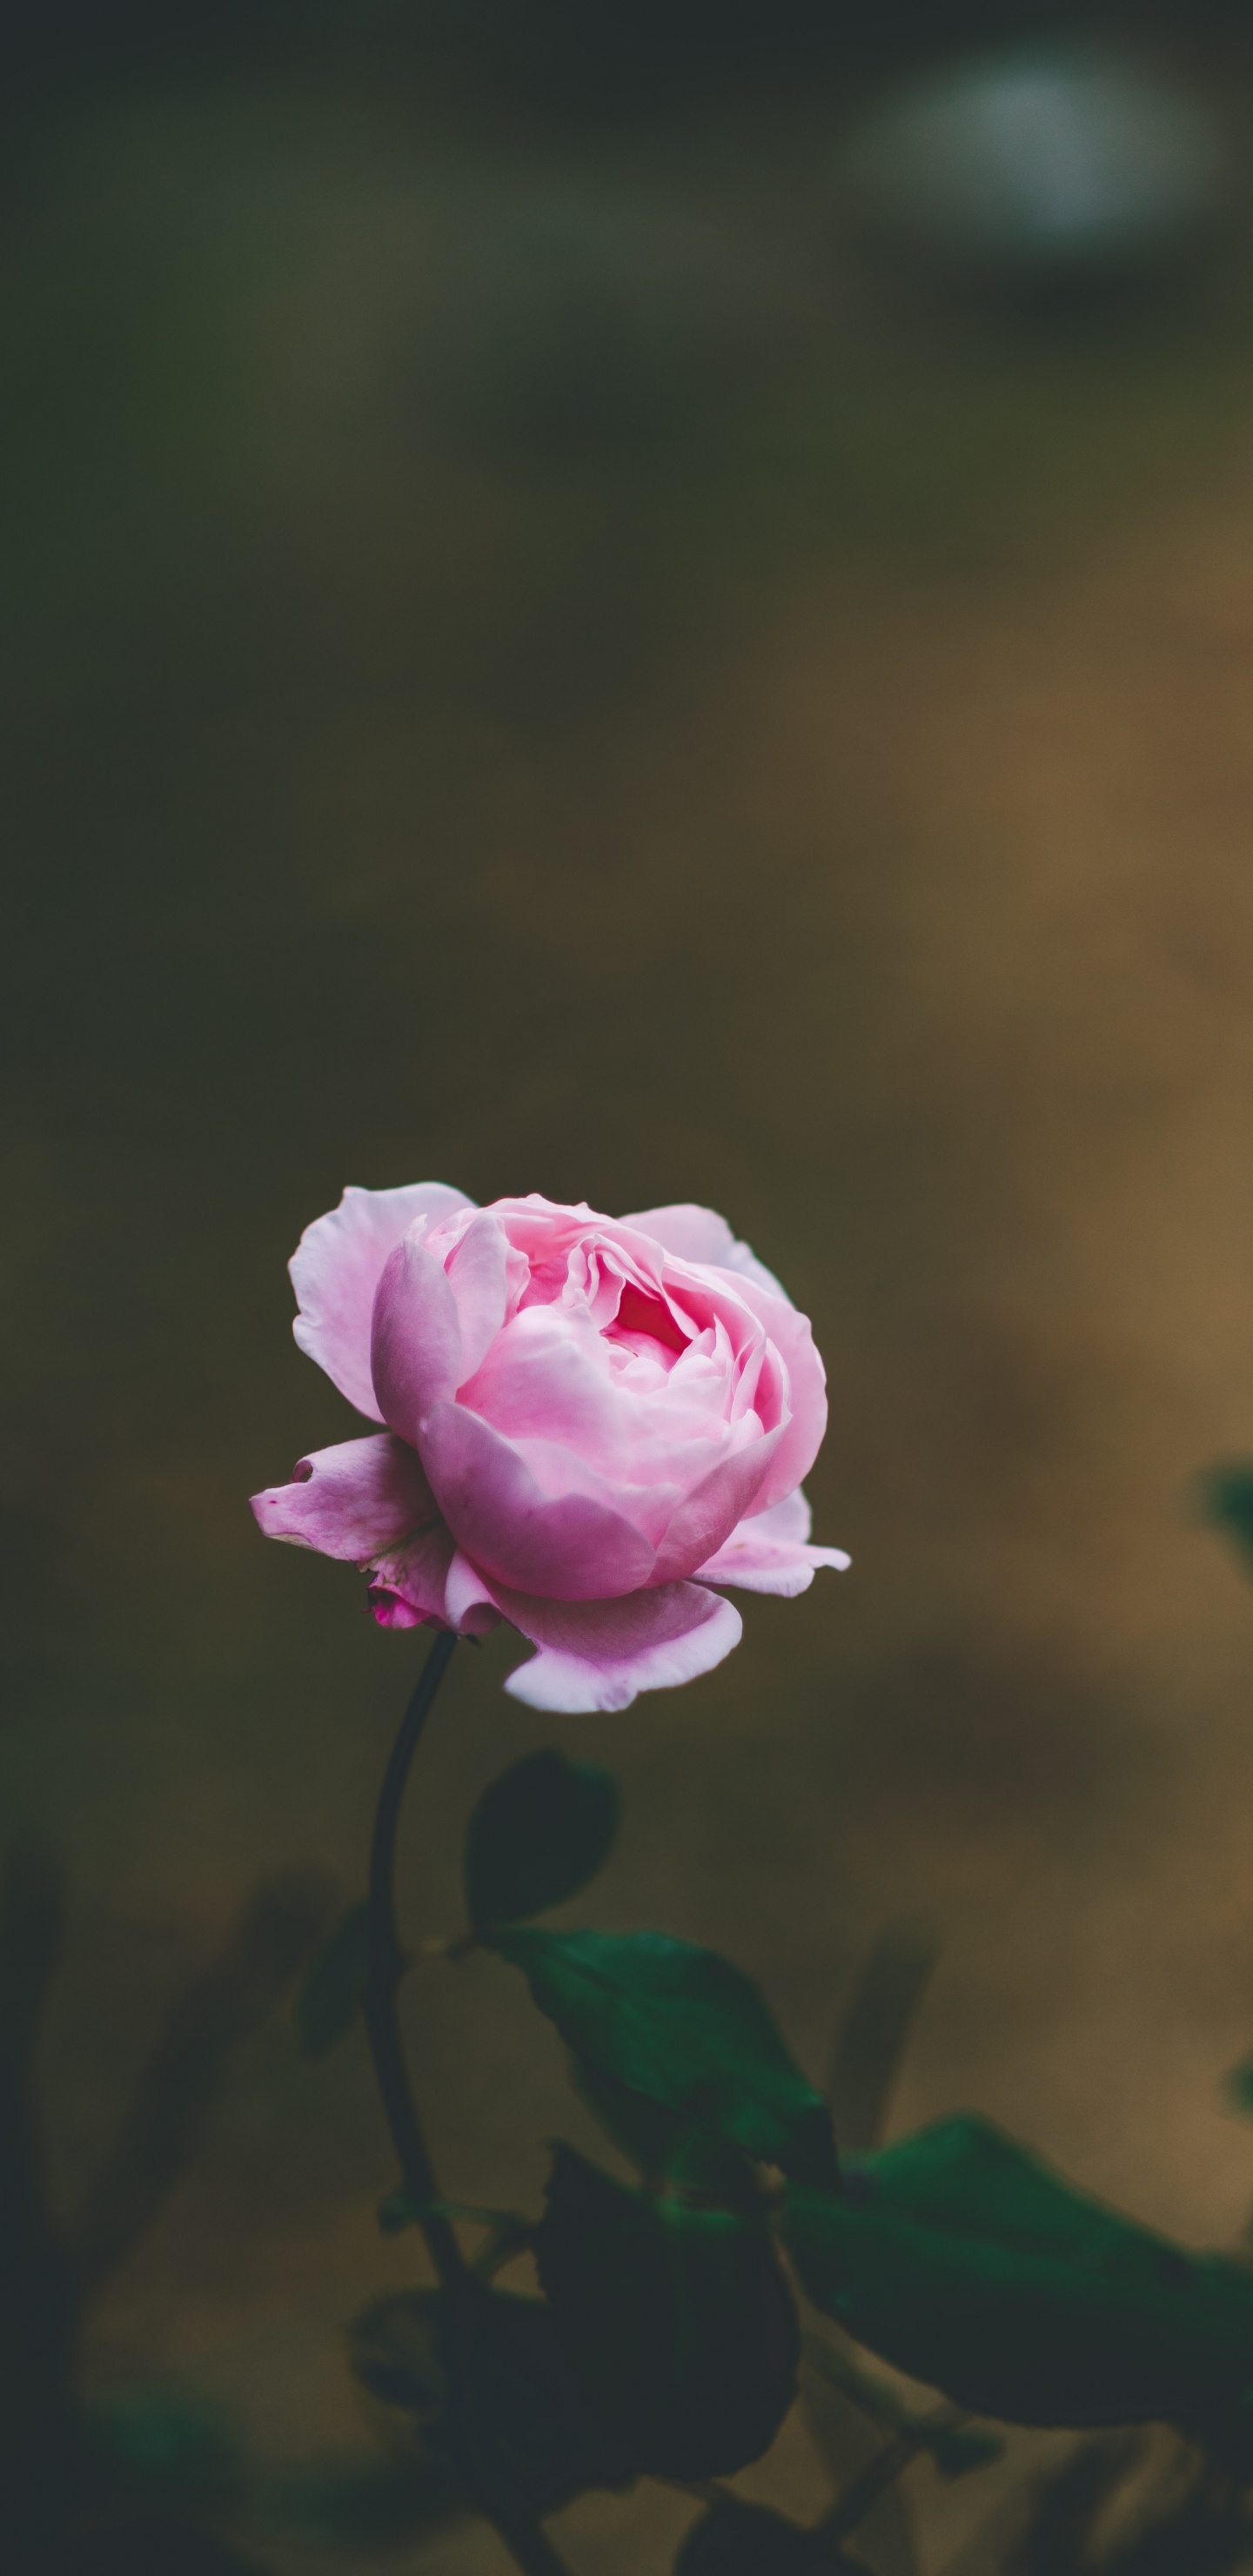 Pink Rose in Bloom During Daytime. Wallpaper in 1440x2960 Resolution